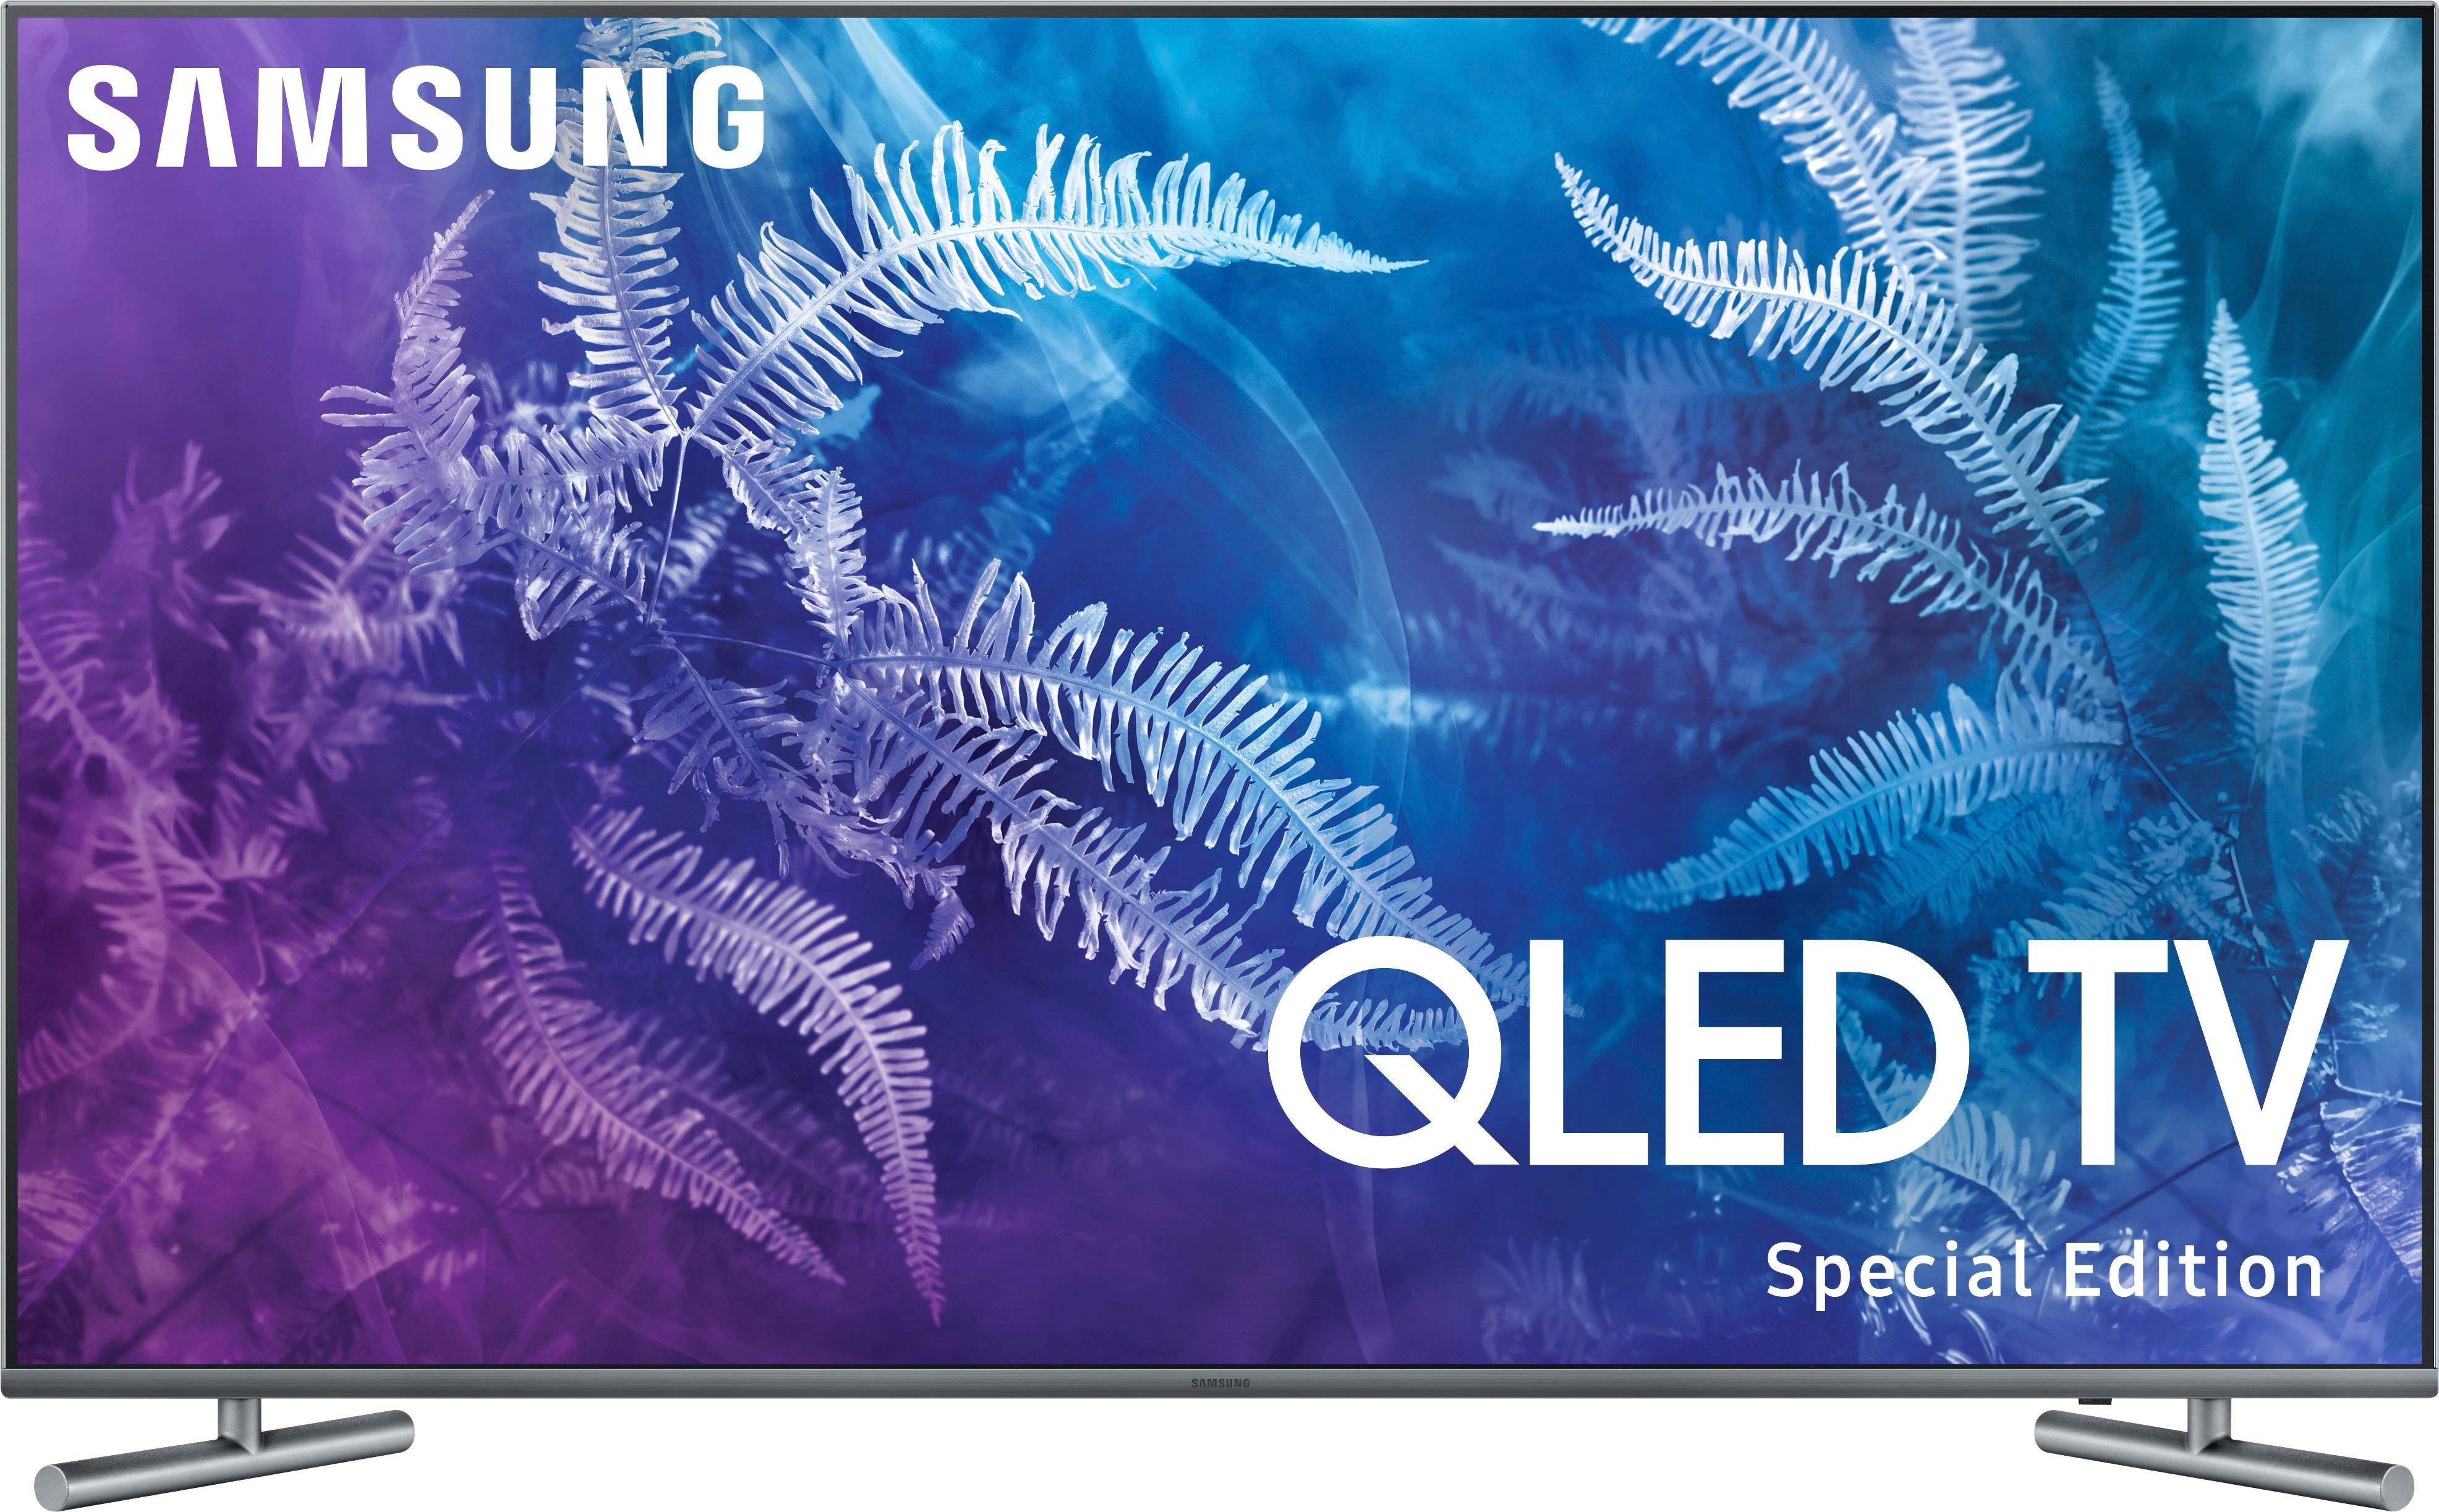 Samsung 49" Class LED Series 2160p Smart UHD TV with HDR - Buy